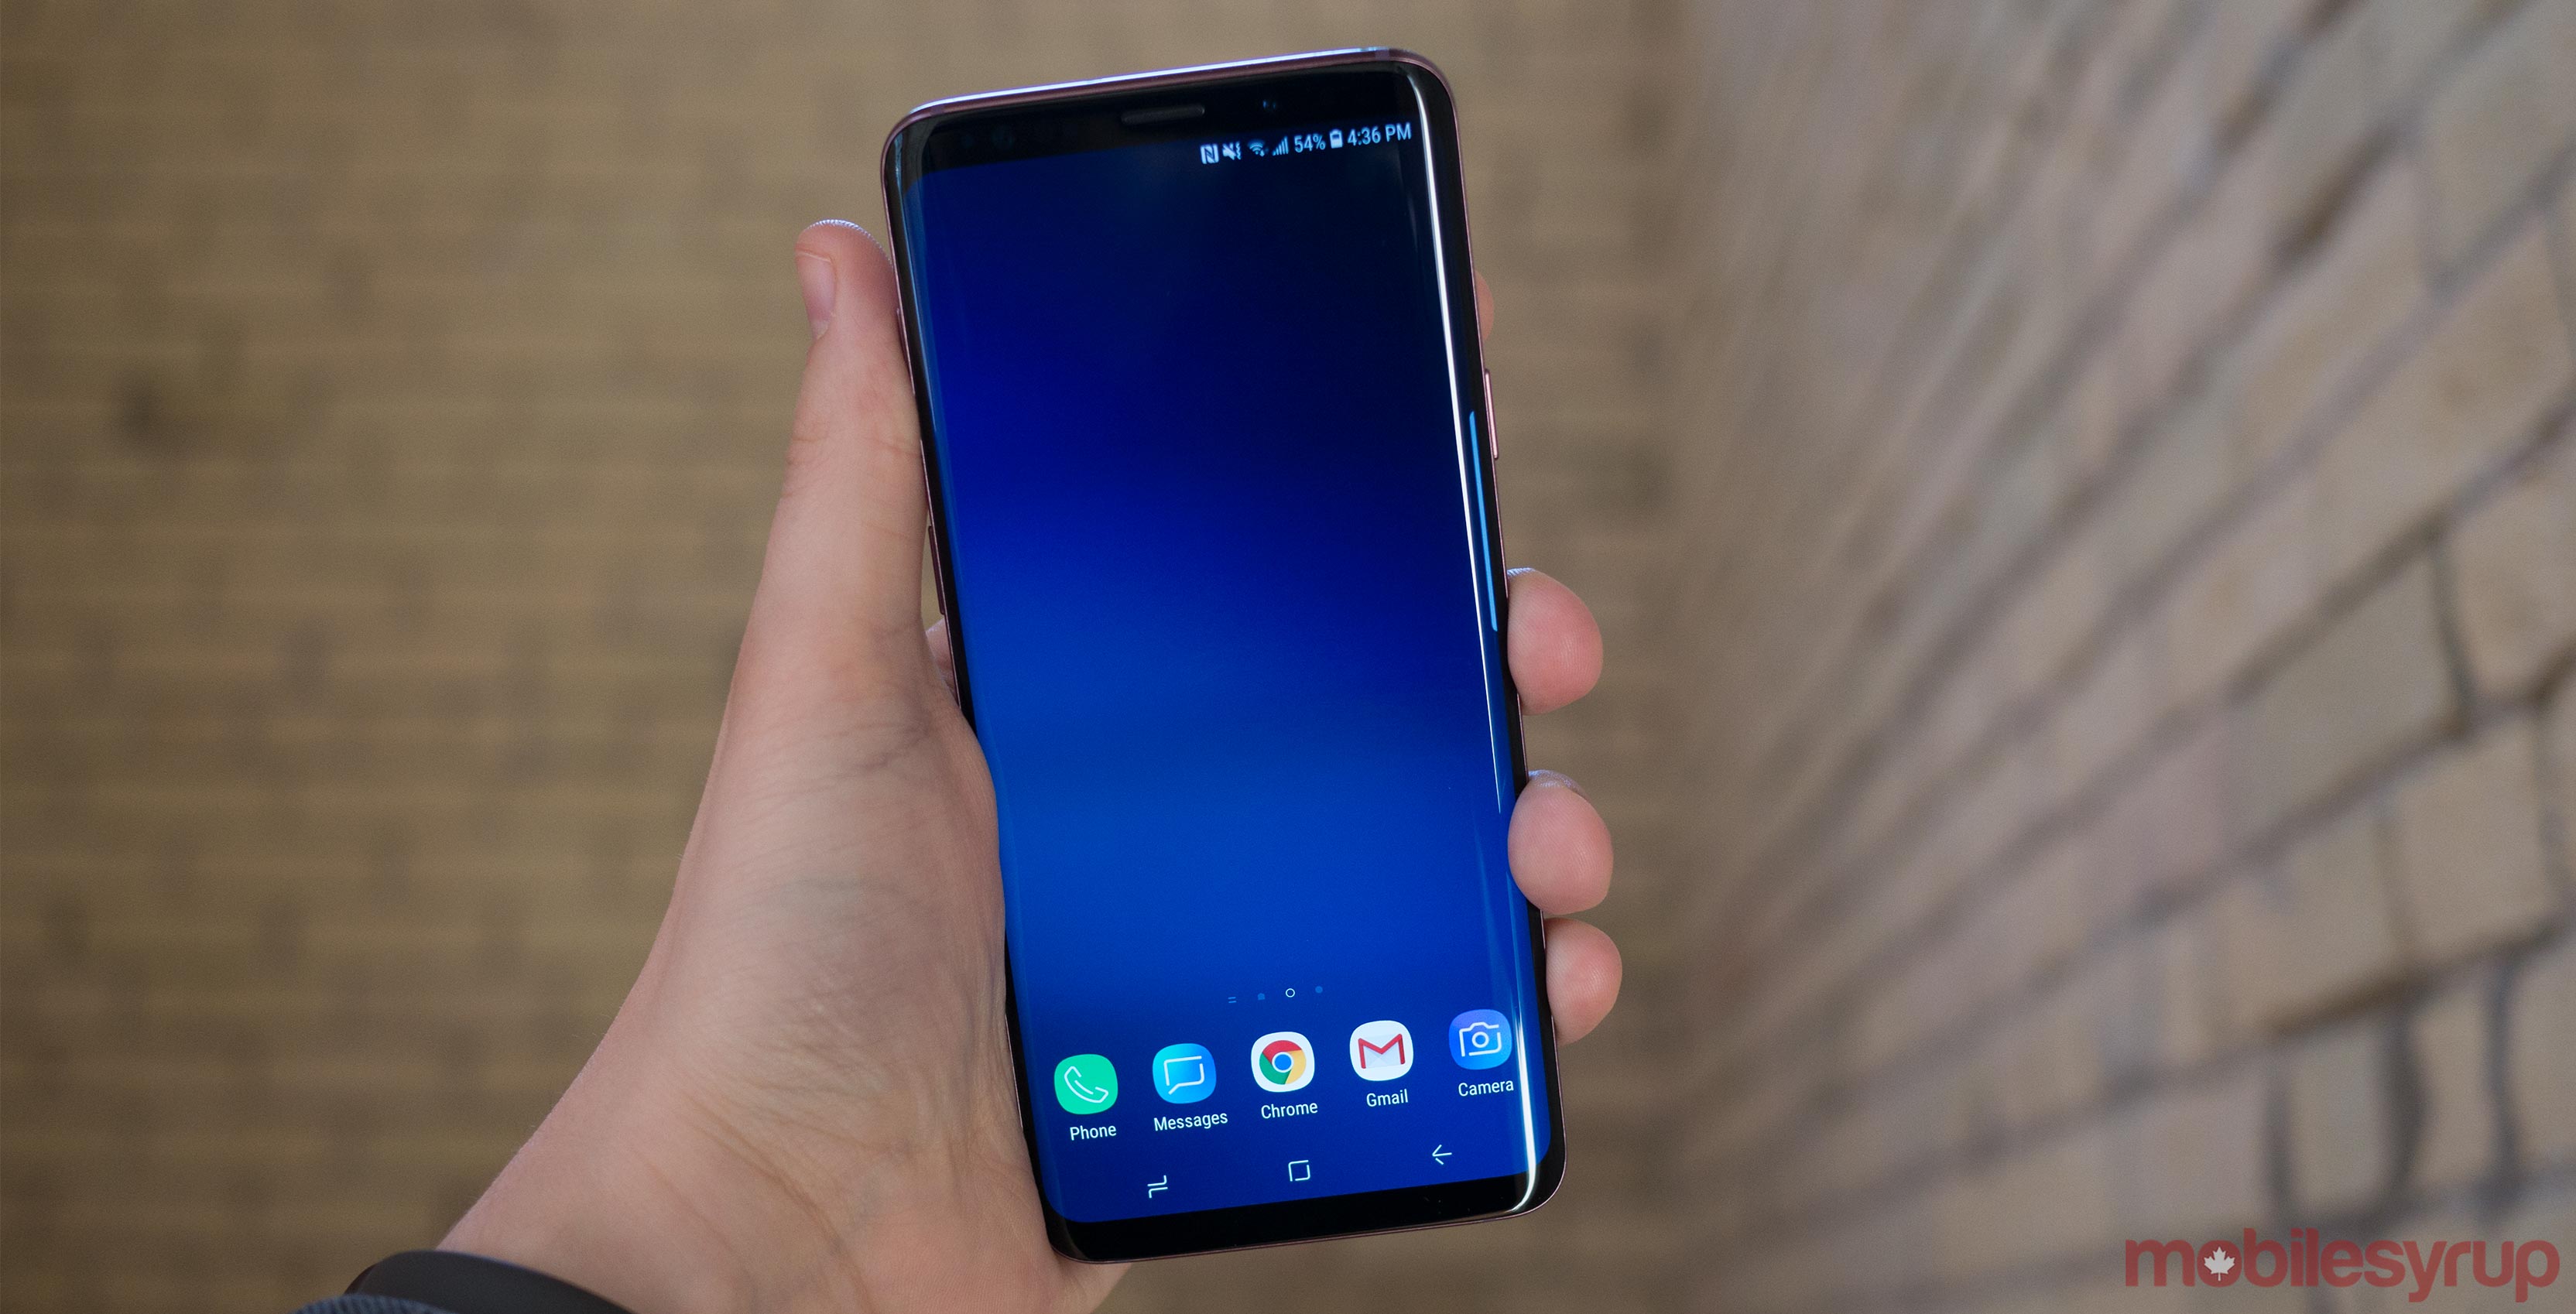 radio supports comes to unlocked Samsung Galaxy and S9 Plus